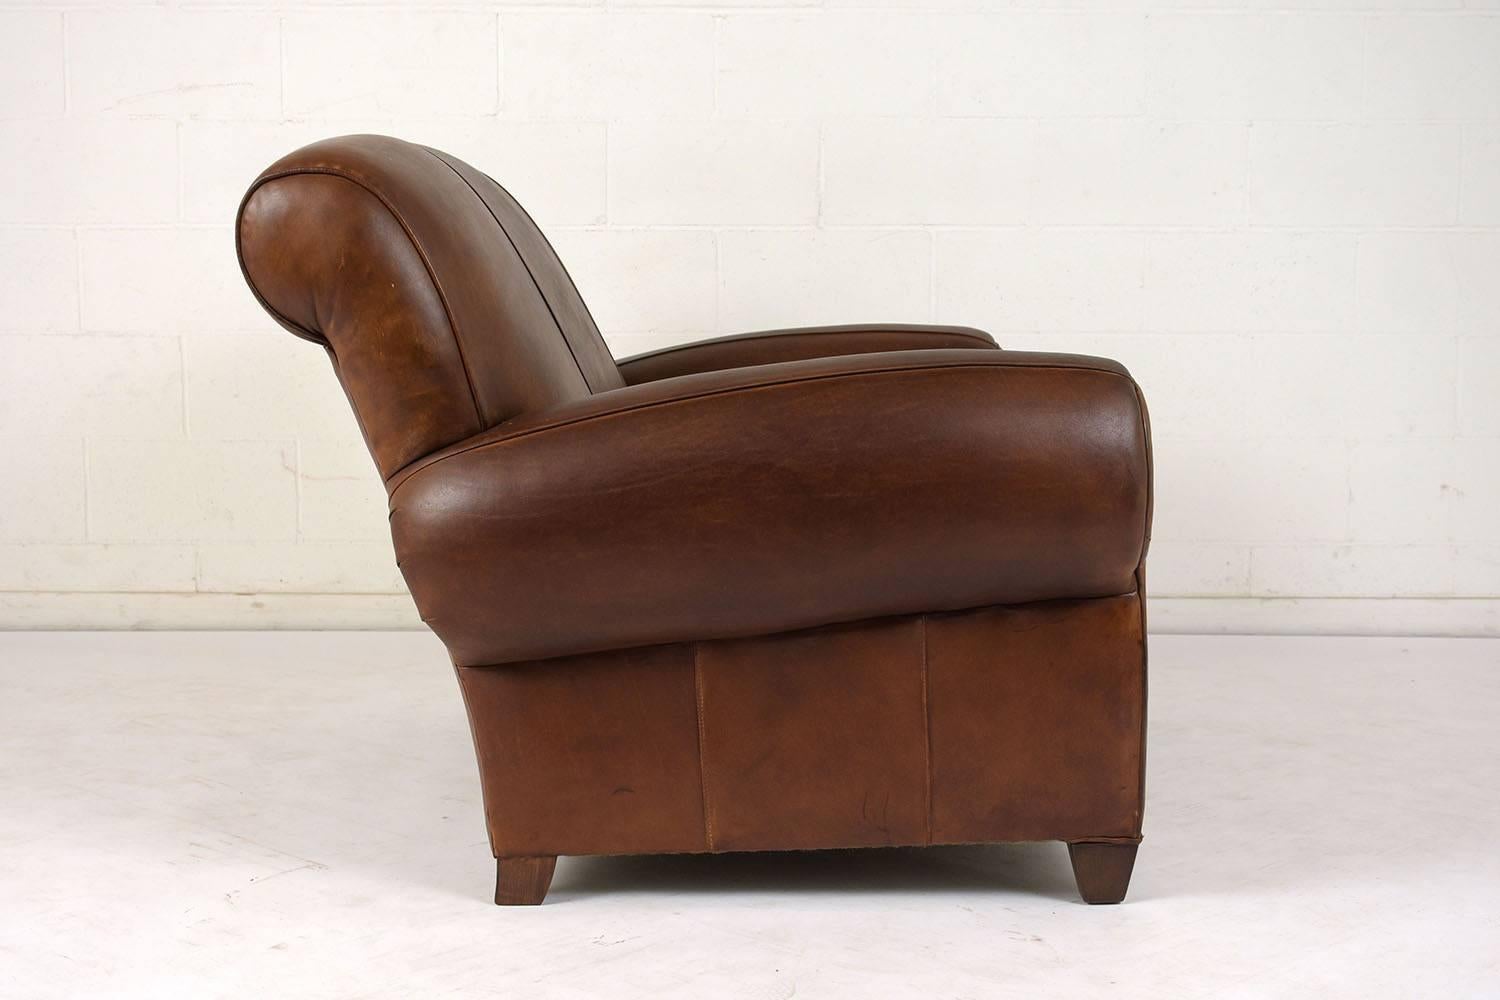 20th Century French Art Deco-Style Leather Loveseat